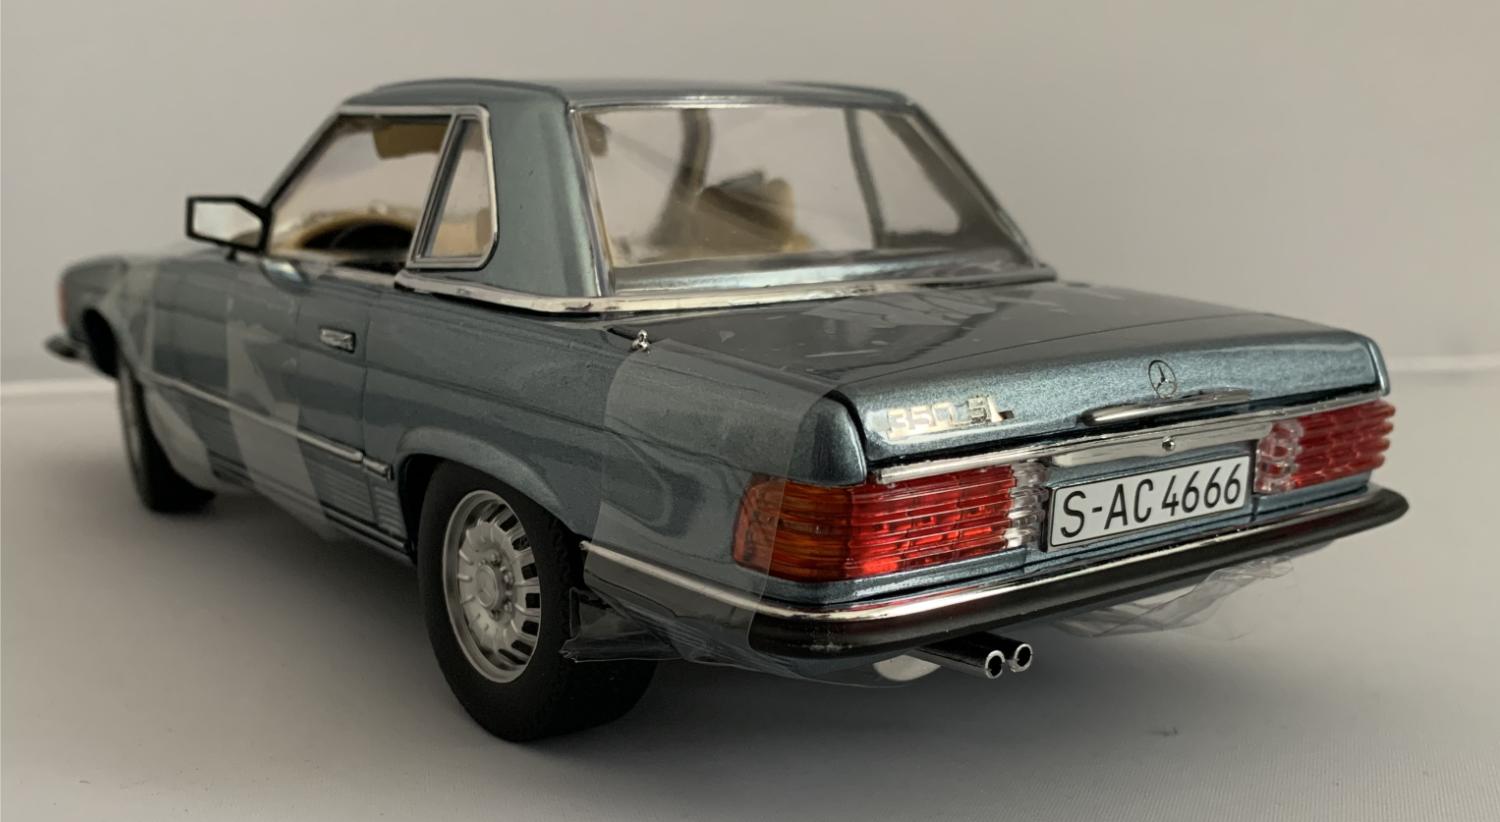 An excellent scale model of the Mercedes Benz 350 SL with high level of detail throughout, all authentically recreated. Model is presented in a box.  The car is approx. 24 cm long and the presentation box is 36cm long